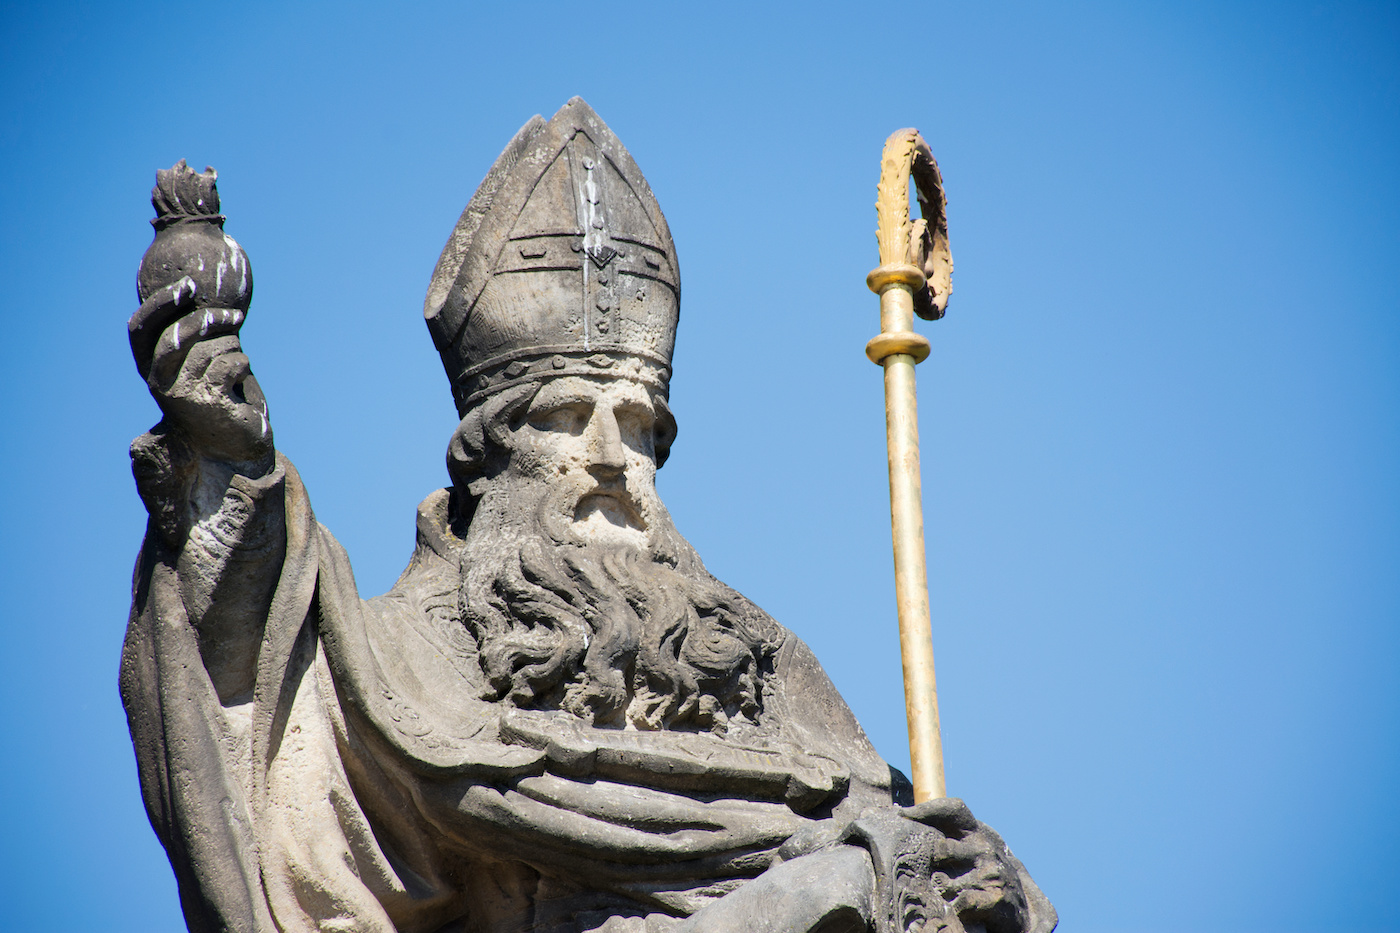 St. Augustinus or Augustine of Hippo Statue for Czechia people and foreigner travelers visit at Charles Bridge crossing Vltava river on August 30, 2017 in Prague, Czech Republic